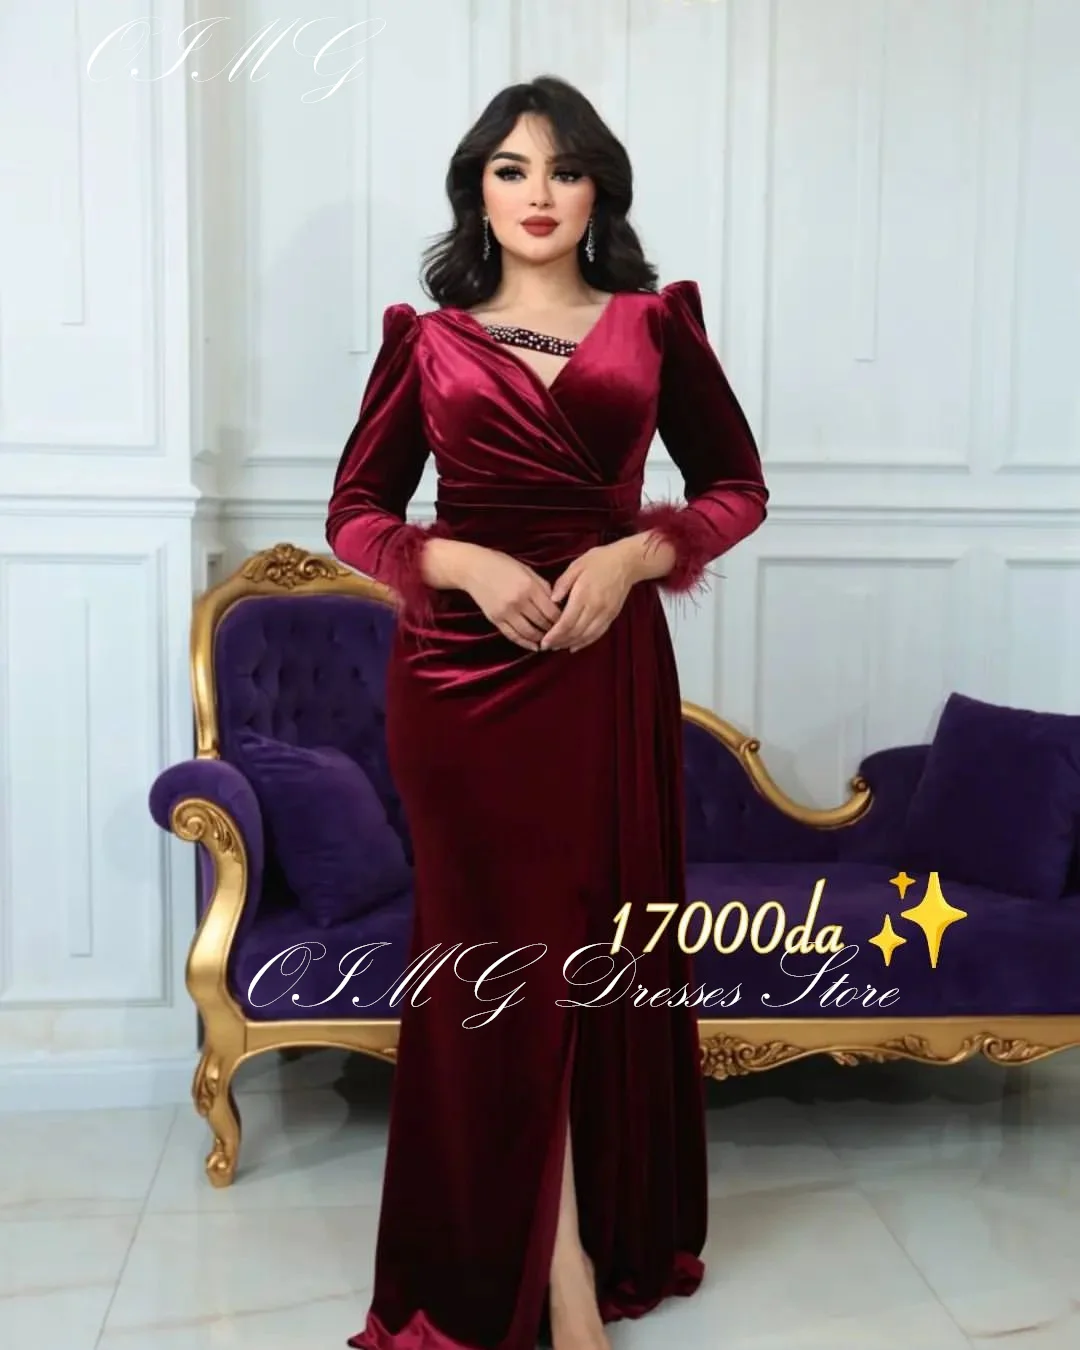 

OIMG Gorgeous V-Neck Red Feather Prom Dresses Velvet Long Sleeves Women Ruched Mermaid Evening Gowns Occasion Formal Party Dress